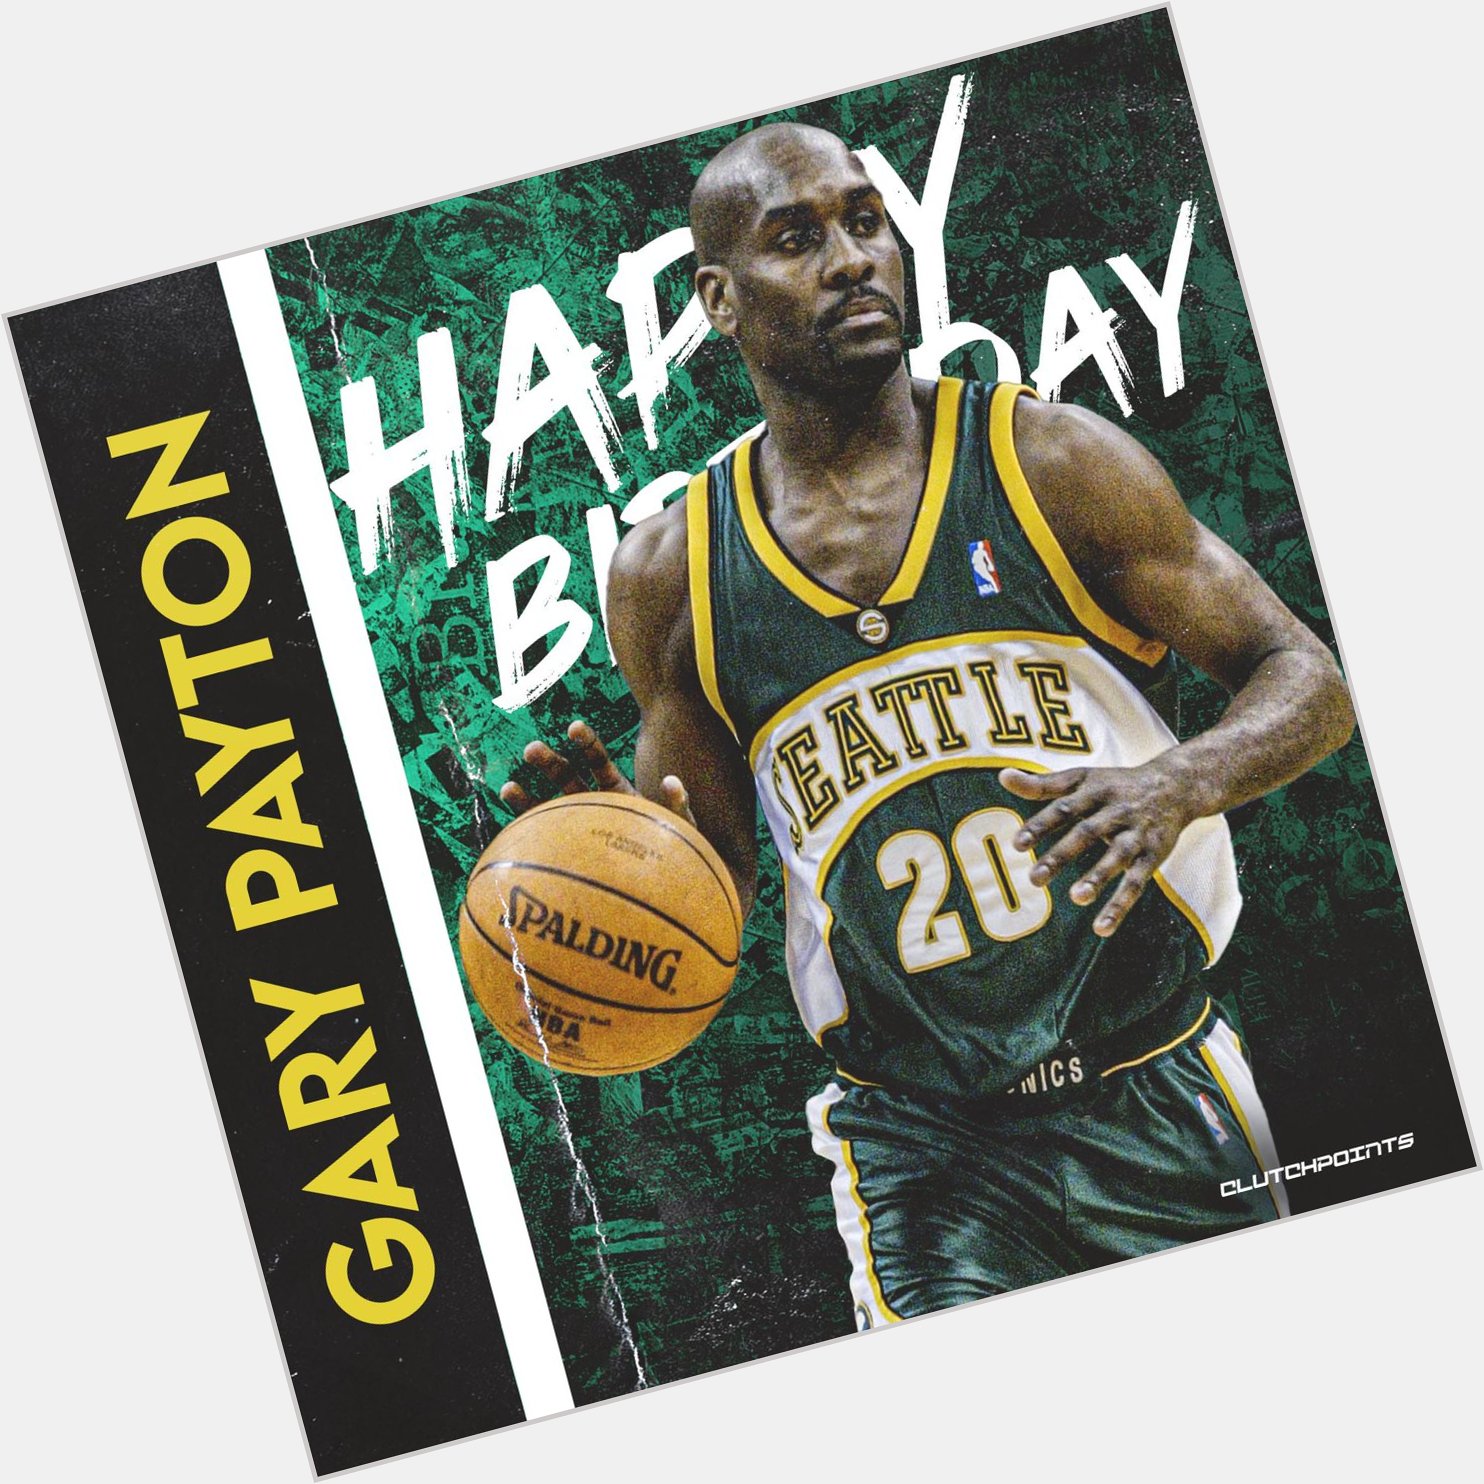 NBA fans, let\s all greet 2006 NBA Champion, 9-time All-Star, and 1996 DPOY Gary Payton a happy 53rd birthday!  